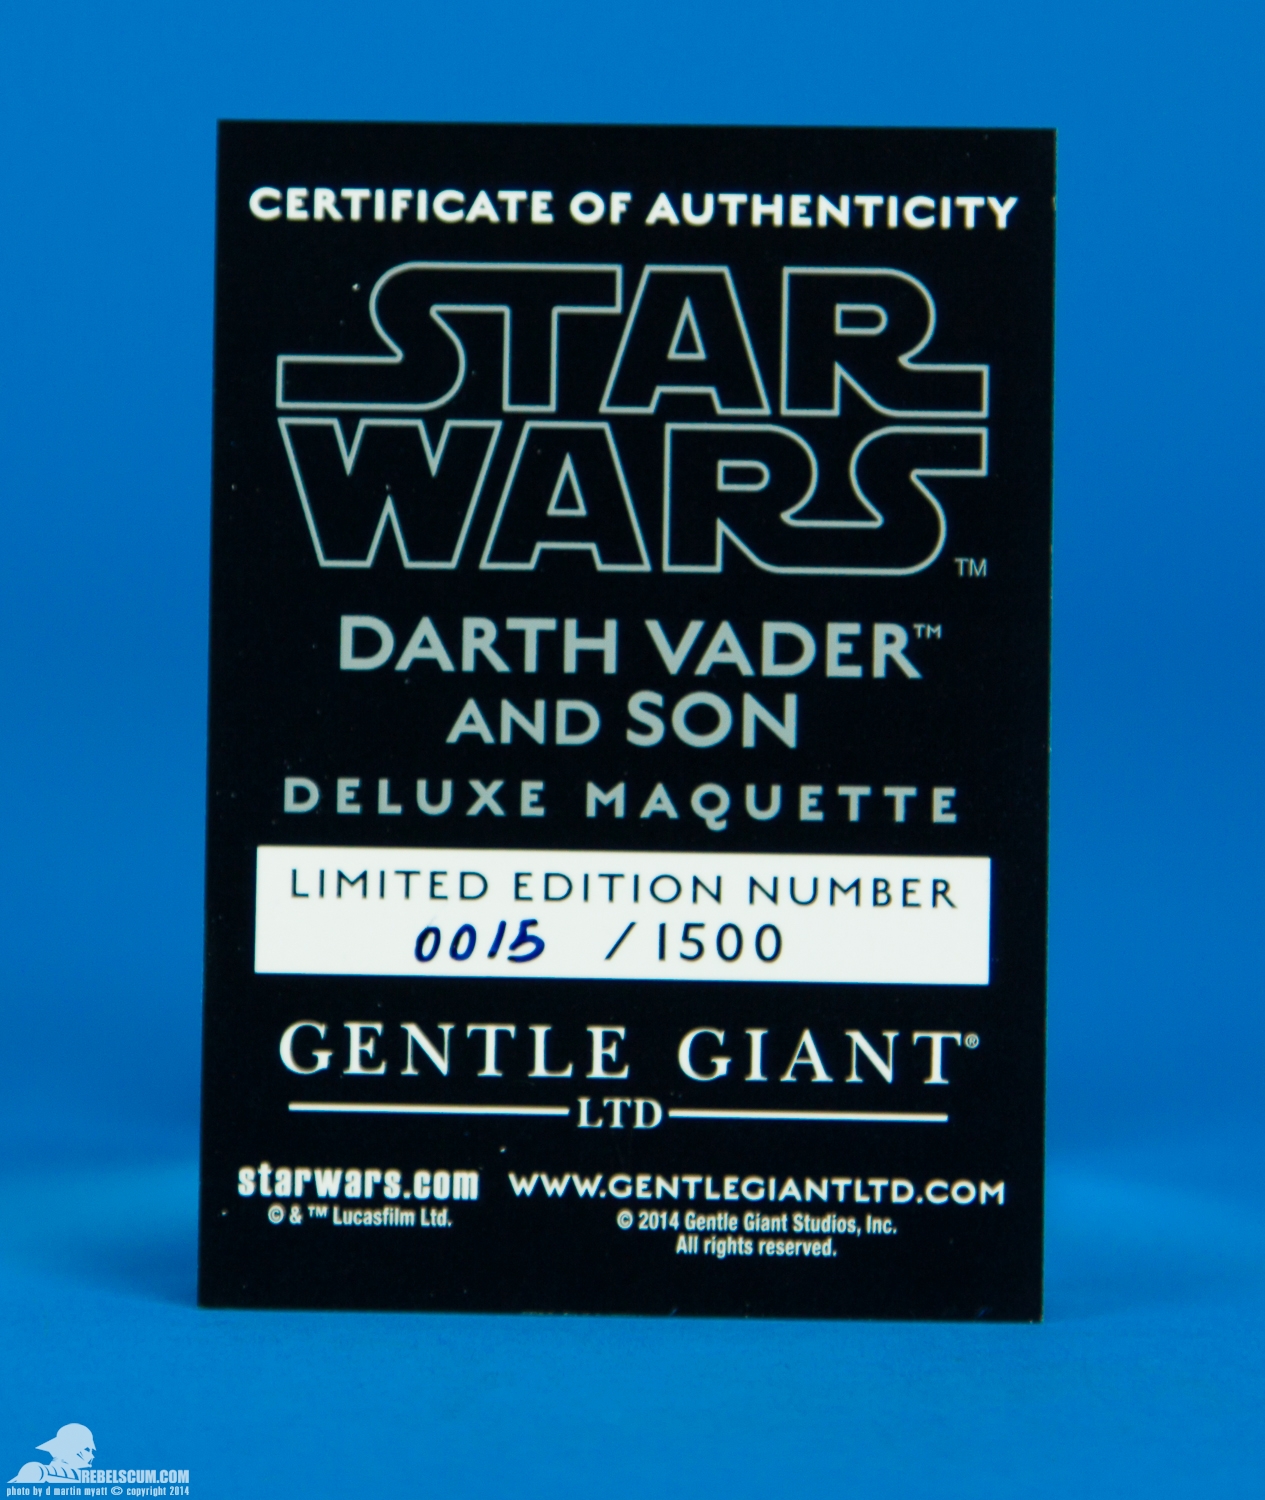 Darth-Vader-And-Son-Deluxe-Maquette-Gentle-Giant-Ltd-013.jpg